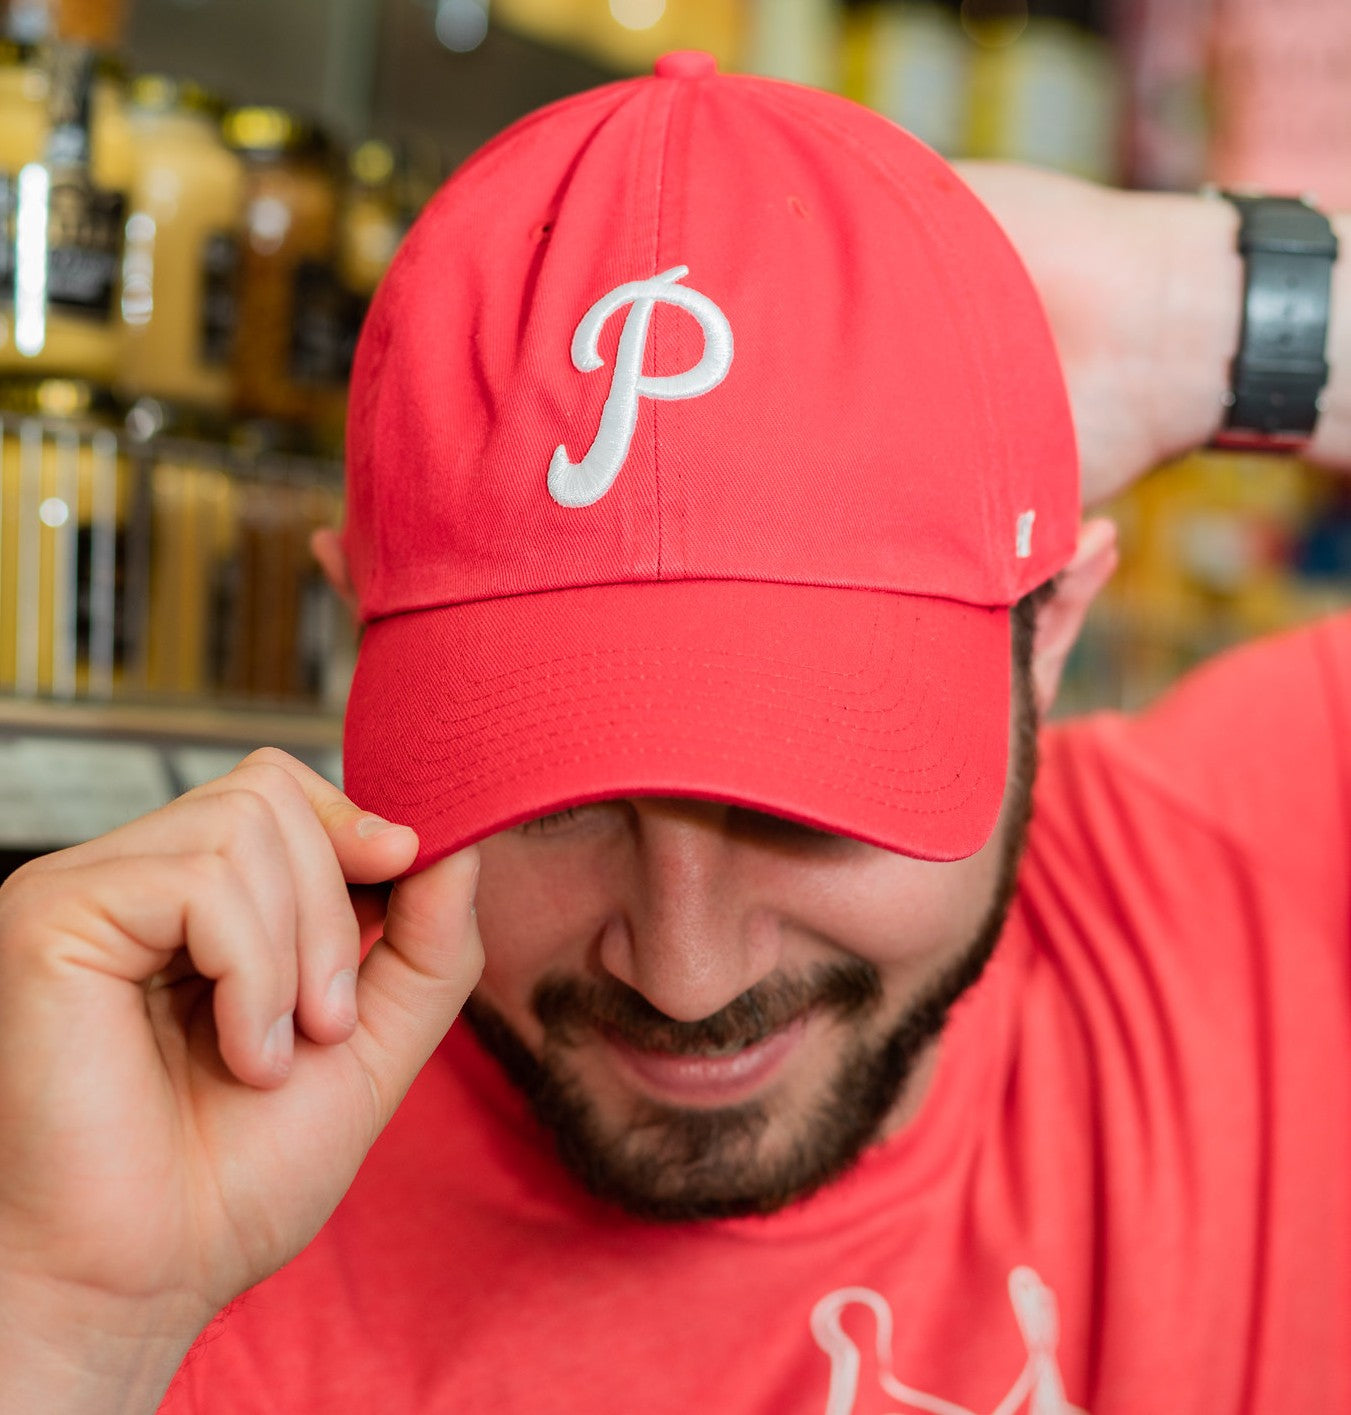 Unique, vintage-style gear Phillies gear still up for grabs at